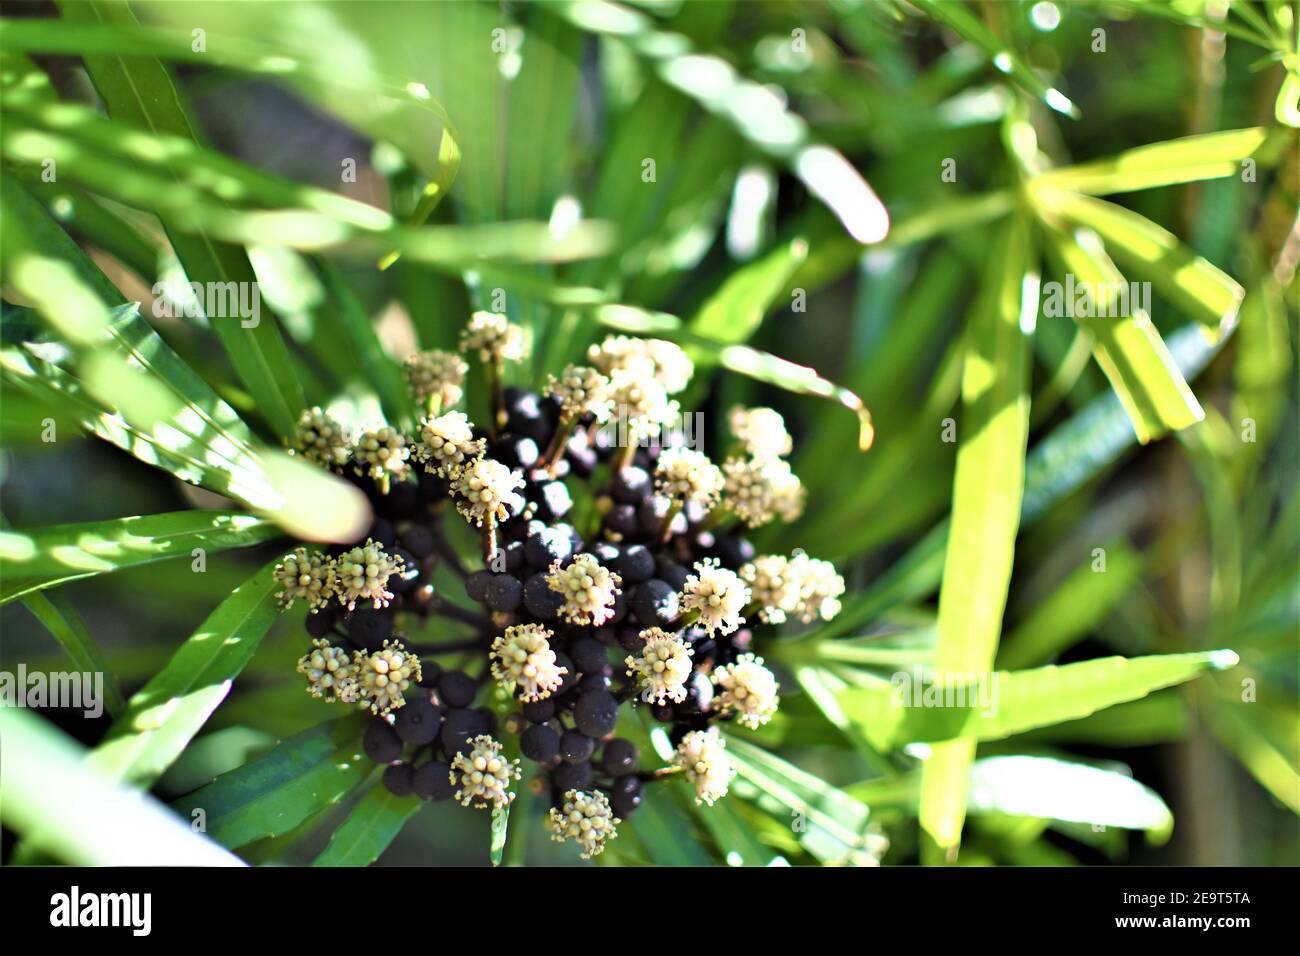 Forest garden green foliage and purple berries Stock Photo